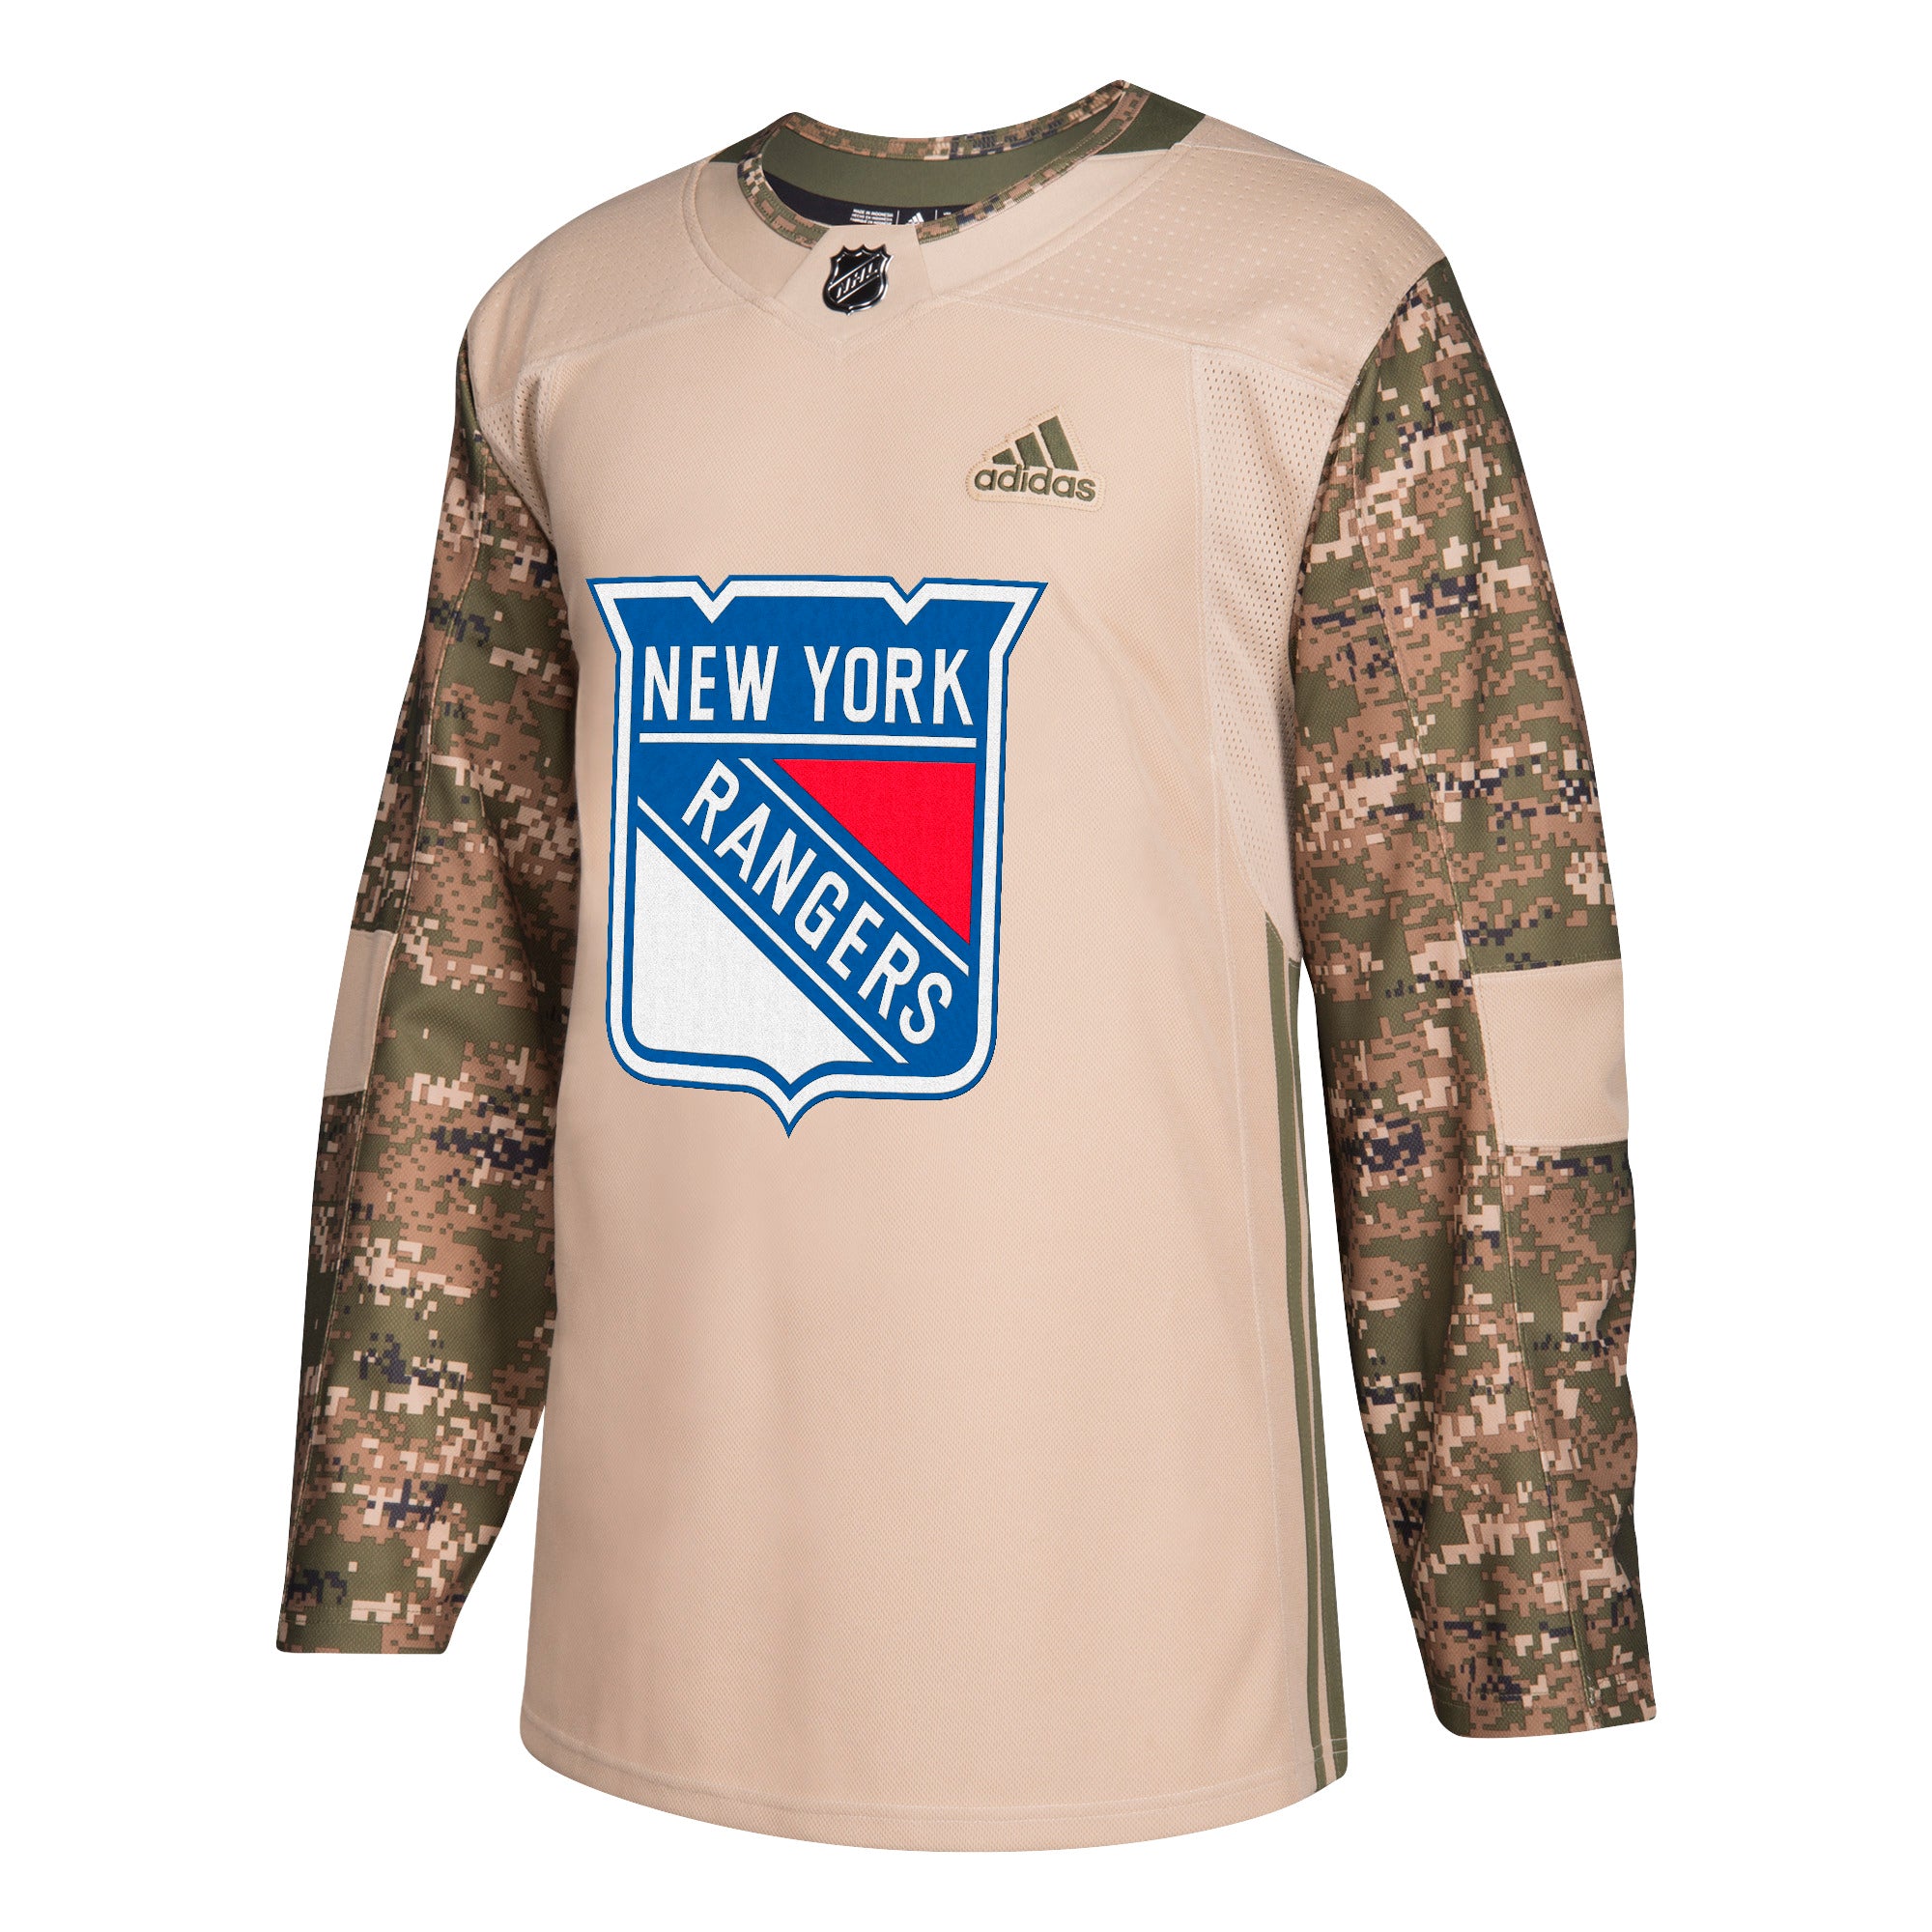 NHL Jerseys for sale in New York, New York